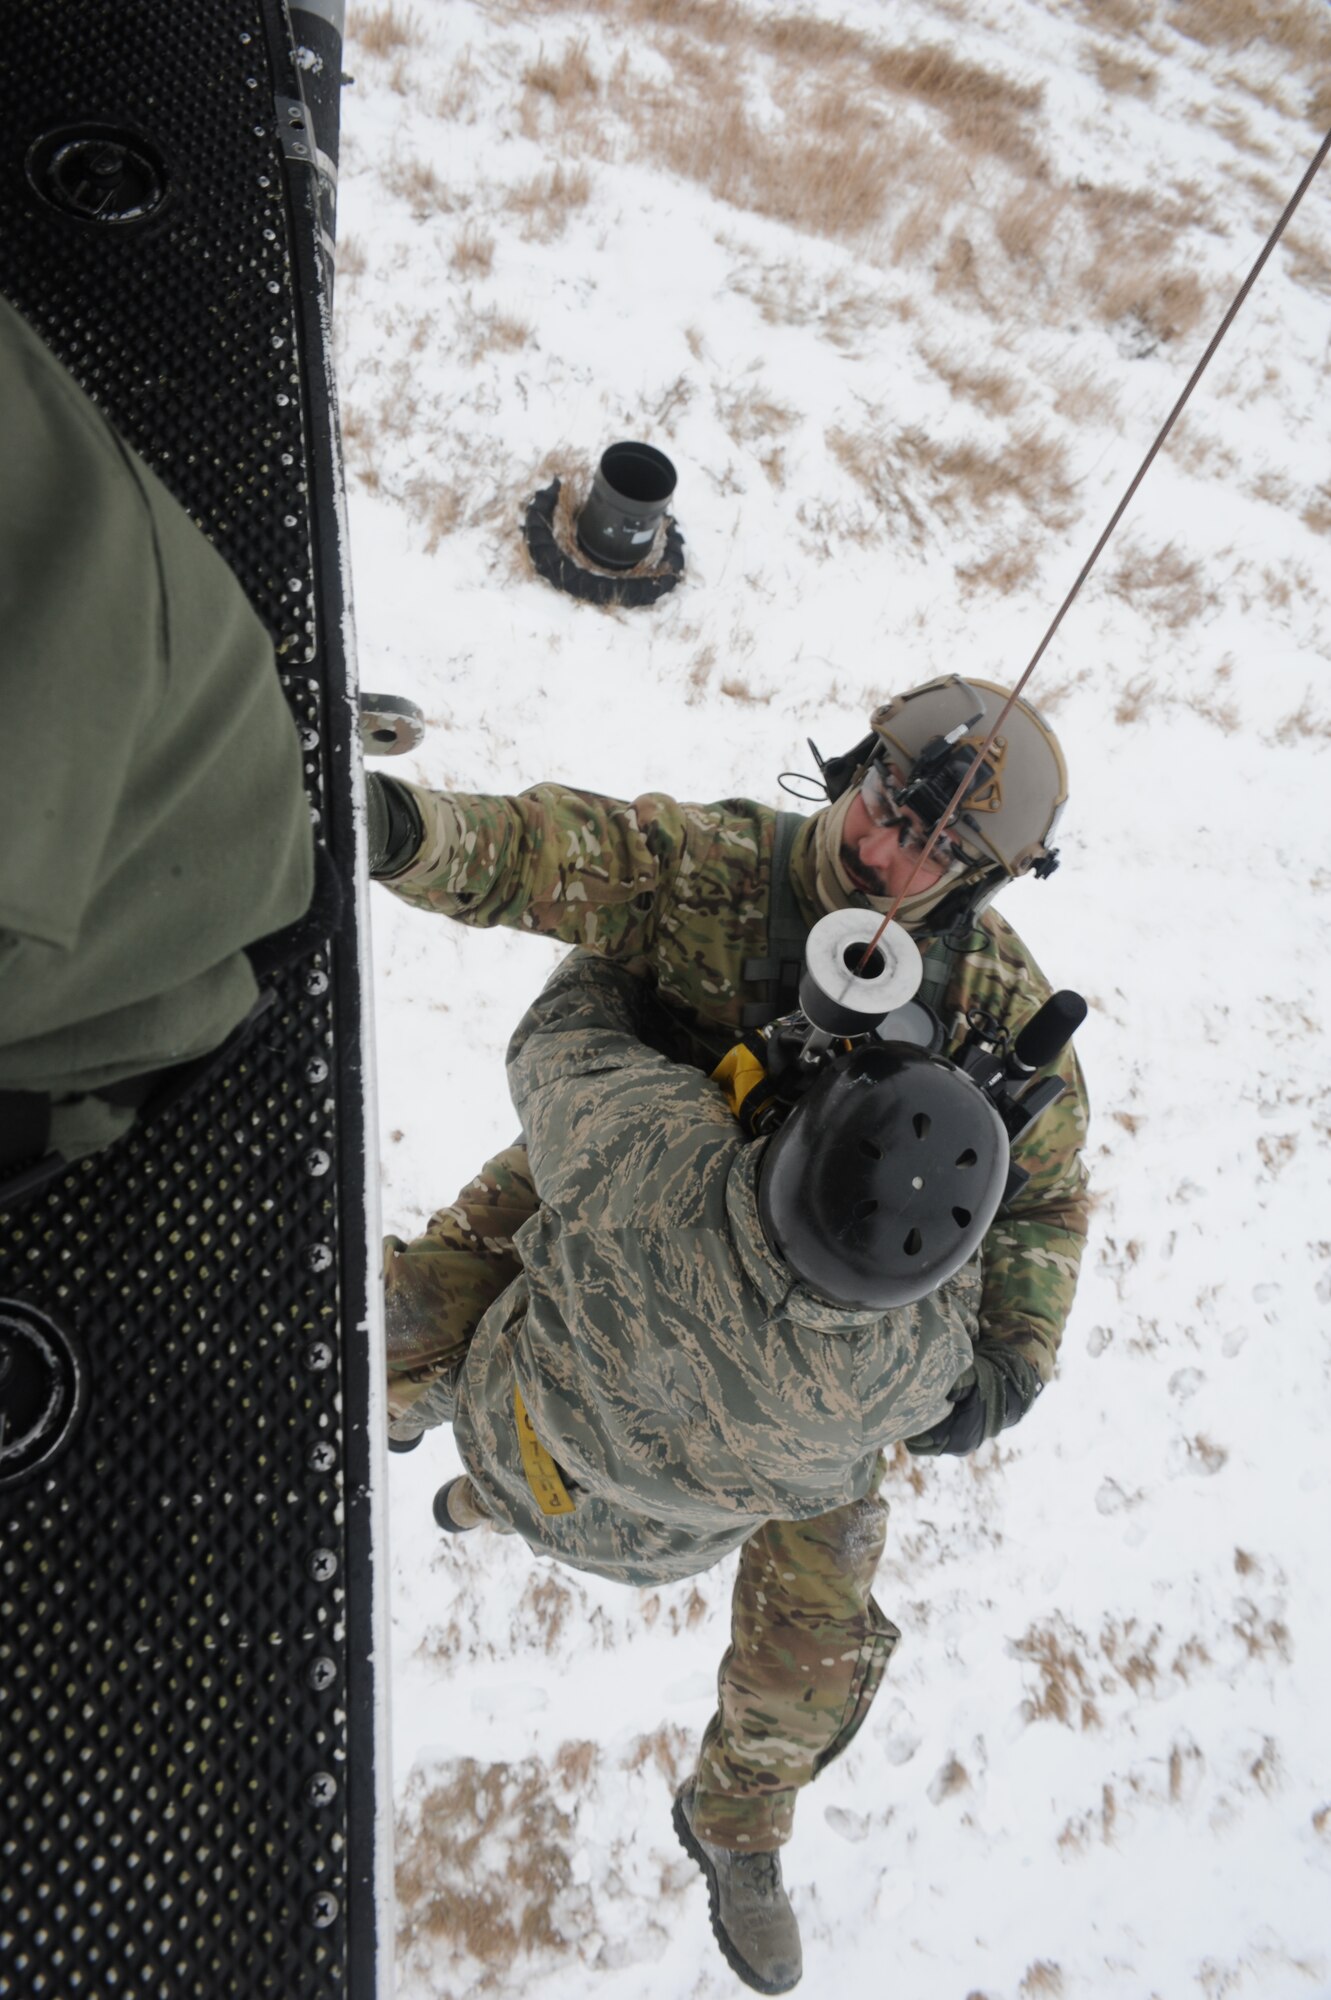 Tech. Sgt. Thomas Liscomb, 54th Helicopter Squadron flight engineer, secures an airman on a hoist as they’re lifted into a UH1-N helicopter near Minot Air Force Base, N.D., Feb. 11, 2015. Liscomb ensured that the Airman was safely seated and lifted into the aircraft as part of a search and rescue training. (U.S. Air Force photos/Senior Airman Stephanie Morris)